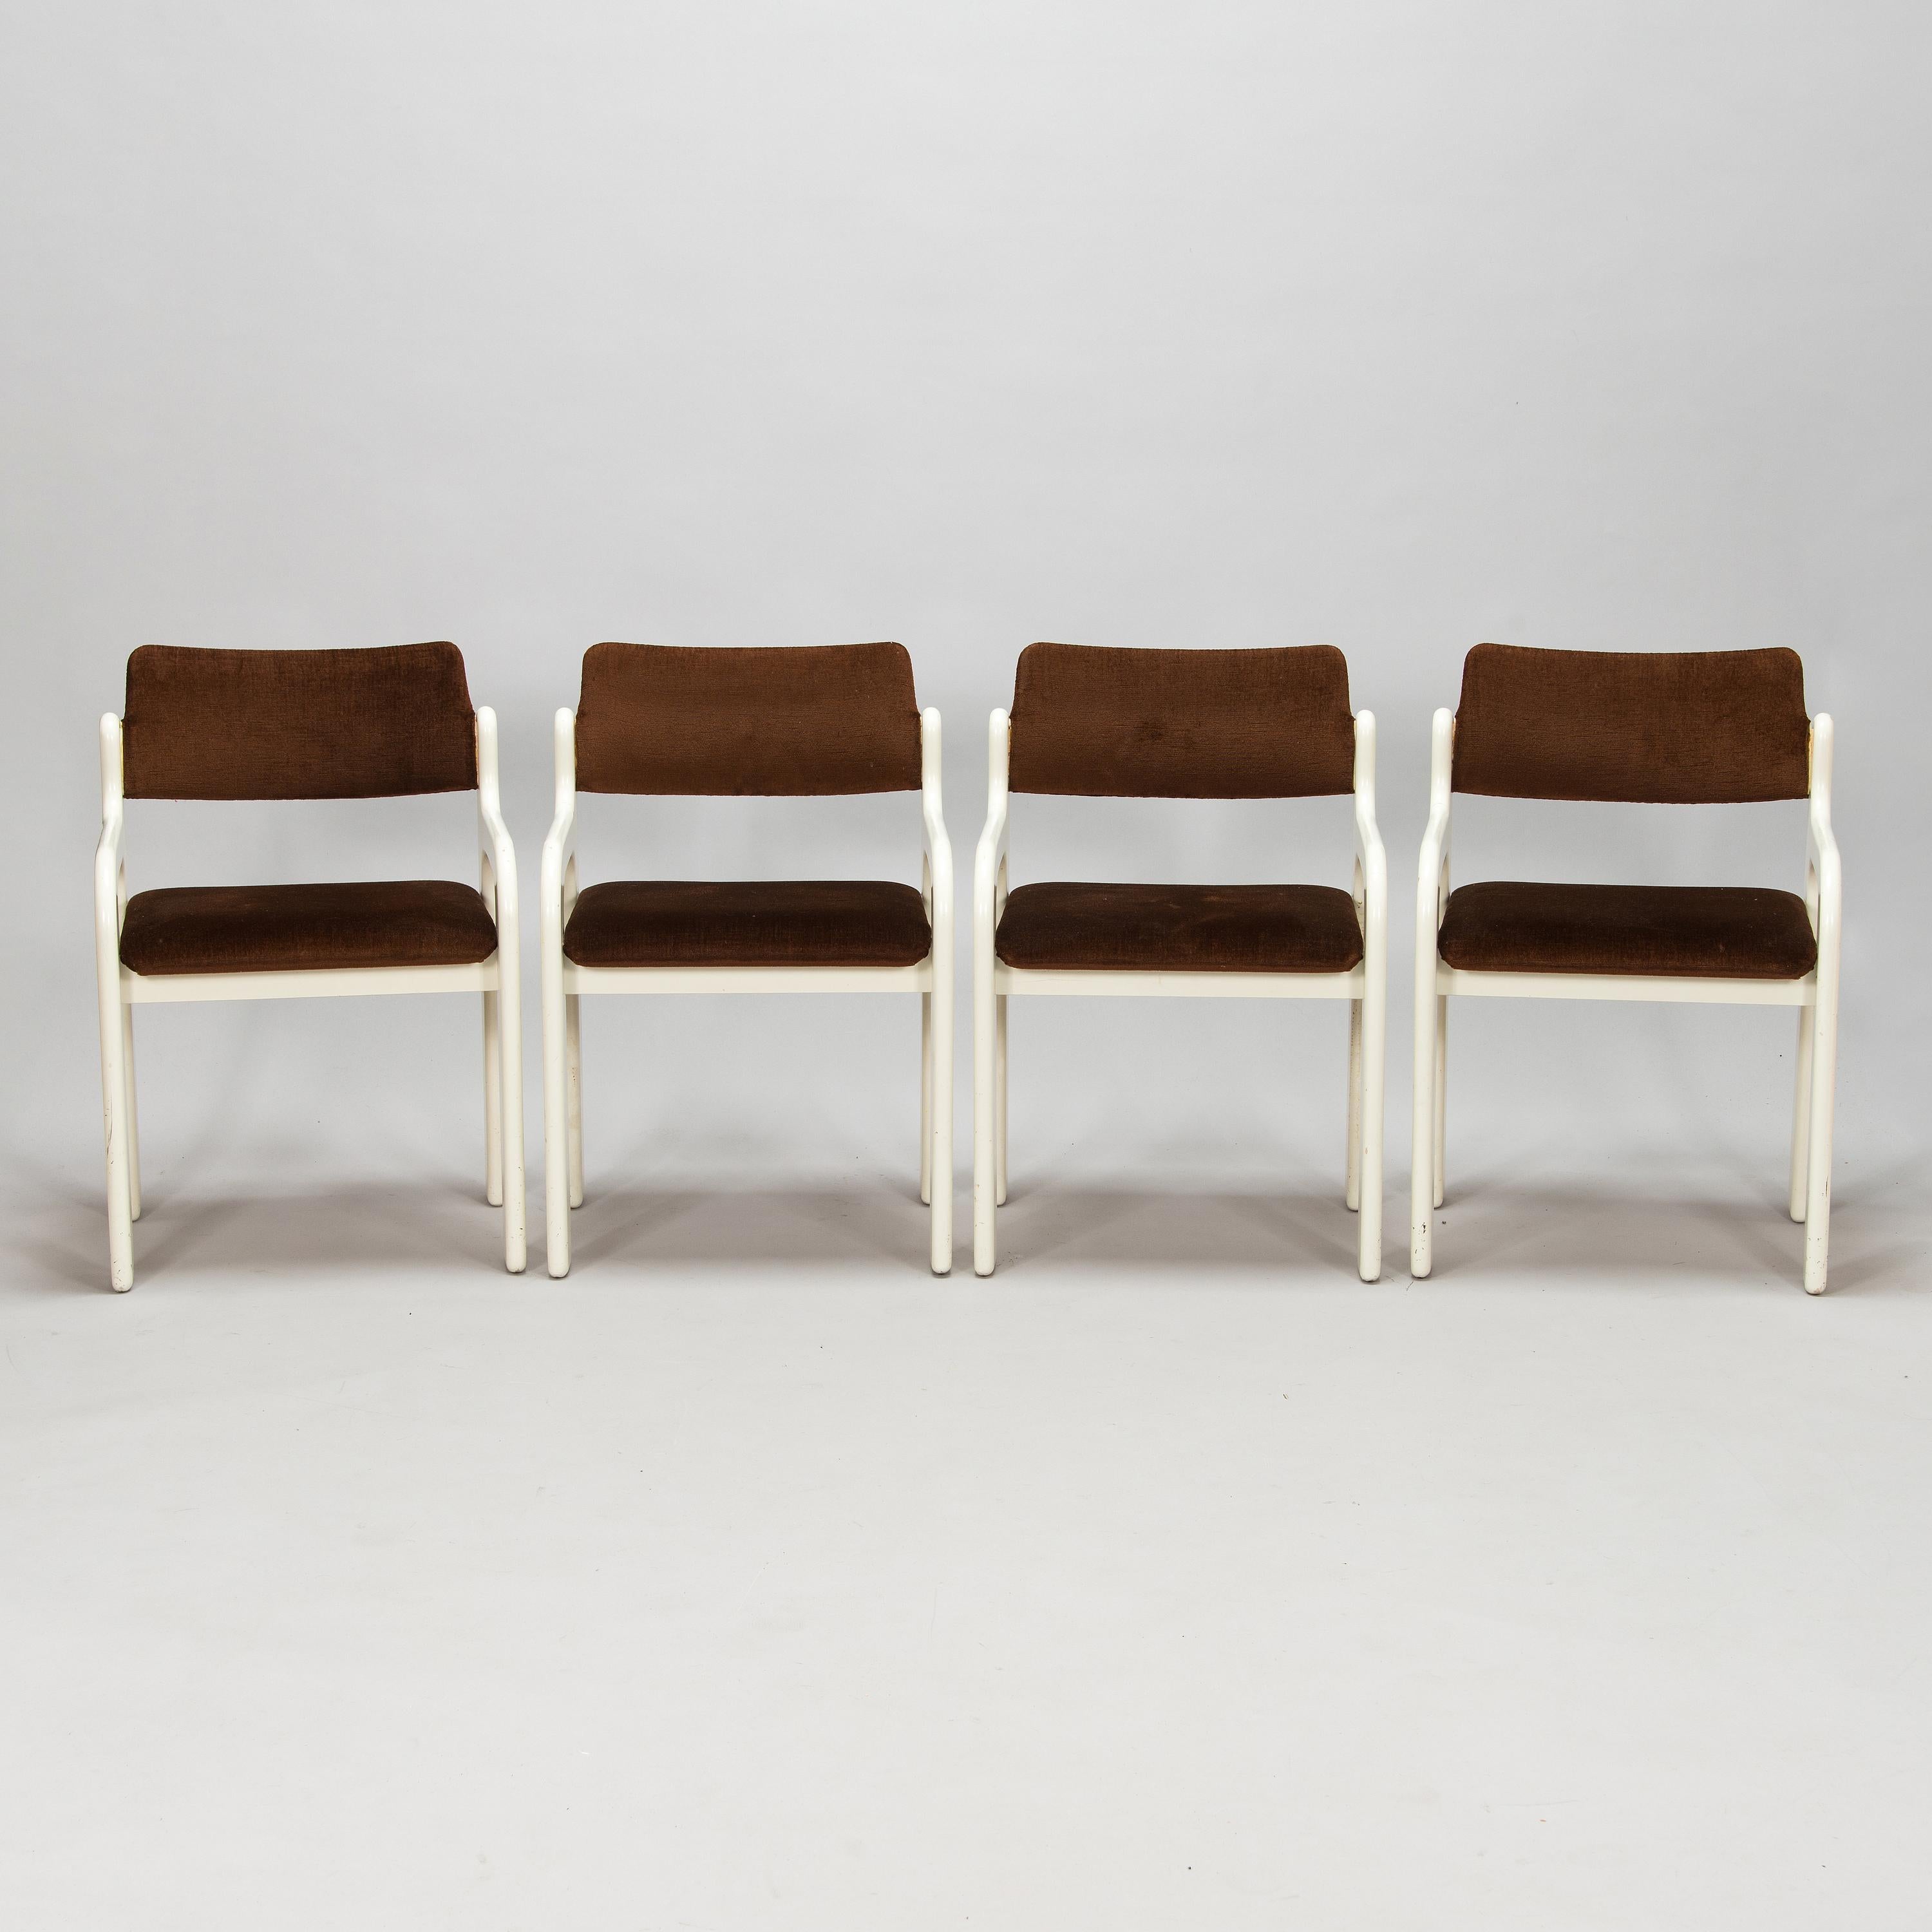 Wood Eero Aarnio 4 Chairs Model Flamingo for Asko Finland Marked, 1970s  For Sale